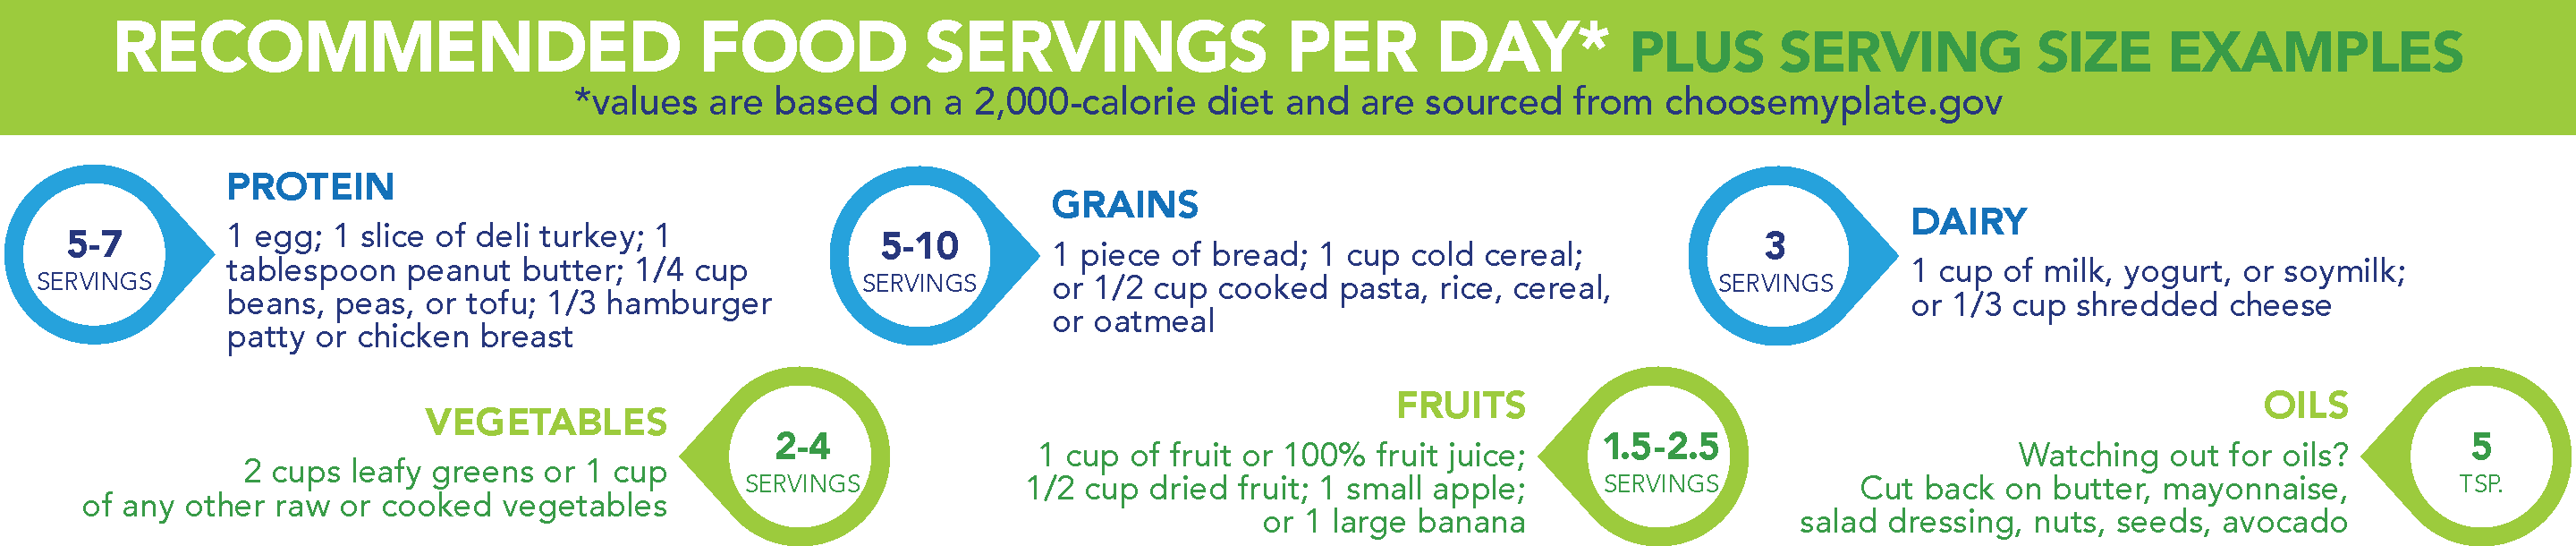 Recommended Food Servings Per Day* plus serving size examples *values are based on a 2,000-calorie diet and are sourced from choosemyplate.gov  5–7 servings of protein: 1 egg; 1 slice of deli turkey; 1 tablespoon peanut butter; ¼ cup beans, peas, or tofu; ⅓ hamburger patty or chicken breast 5–10 servings of grains: 1 piece of bread; 1 cup cold cereal; or ½ cup cooked pasta, rice, cereal, or oatmeal 3 servings of dairy: 1 cup of milk, yogurt, or soymilk; or ⅓ cup shredded cheese 2–4 servings of vegetables: 2 cups leafy greens or 1 cup of any other raw or cooked vegetables 1.5–2.5 servings of fruits: 1 cup of fruit or 100% fruit juice; ½ cup dried fruit; 1 small apple; or 1 large banana 5 teaspoons of oils: Watching out for oils? Cut back on butter, mayonnaise, salad dressing, nuts, seeds, avocado.